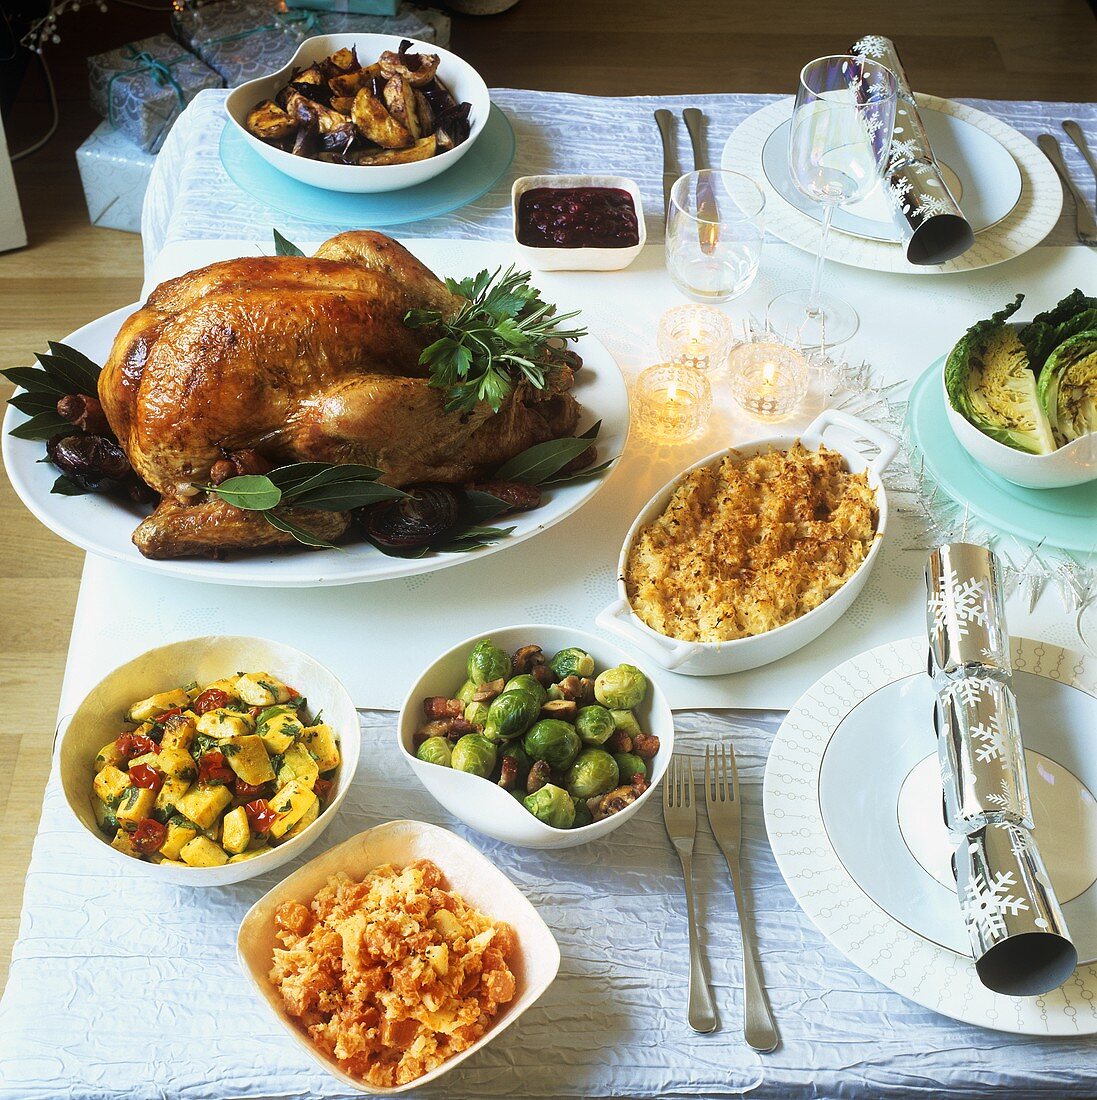 Christmas meal with turkey and accompaniments